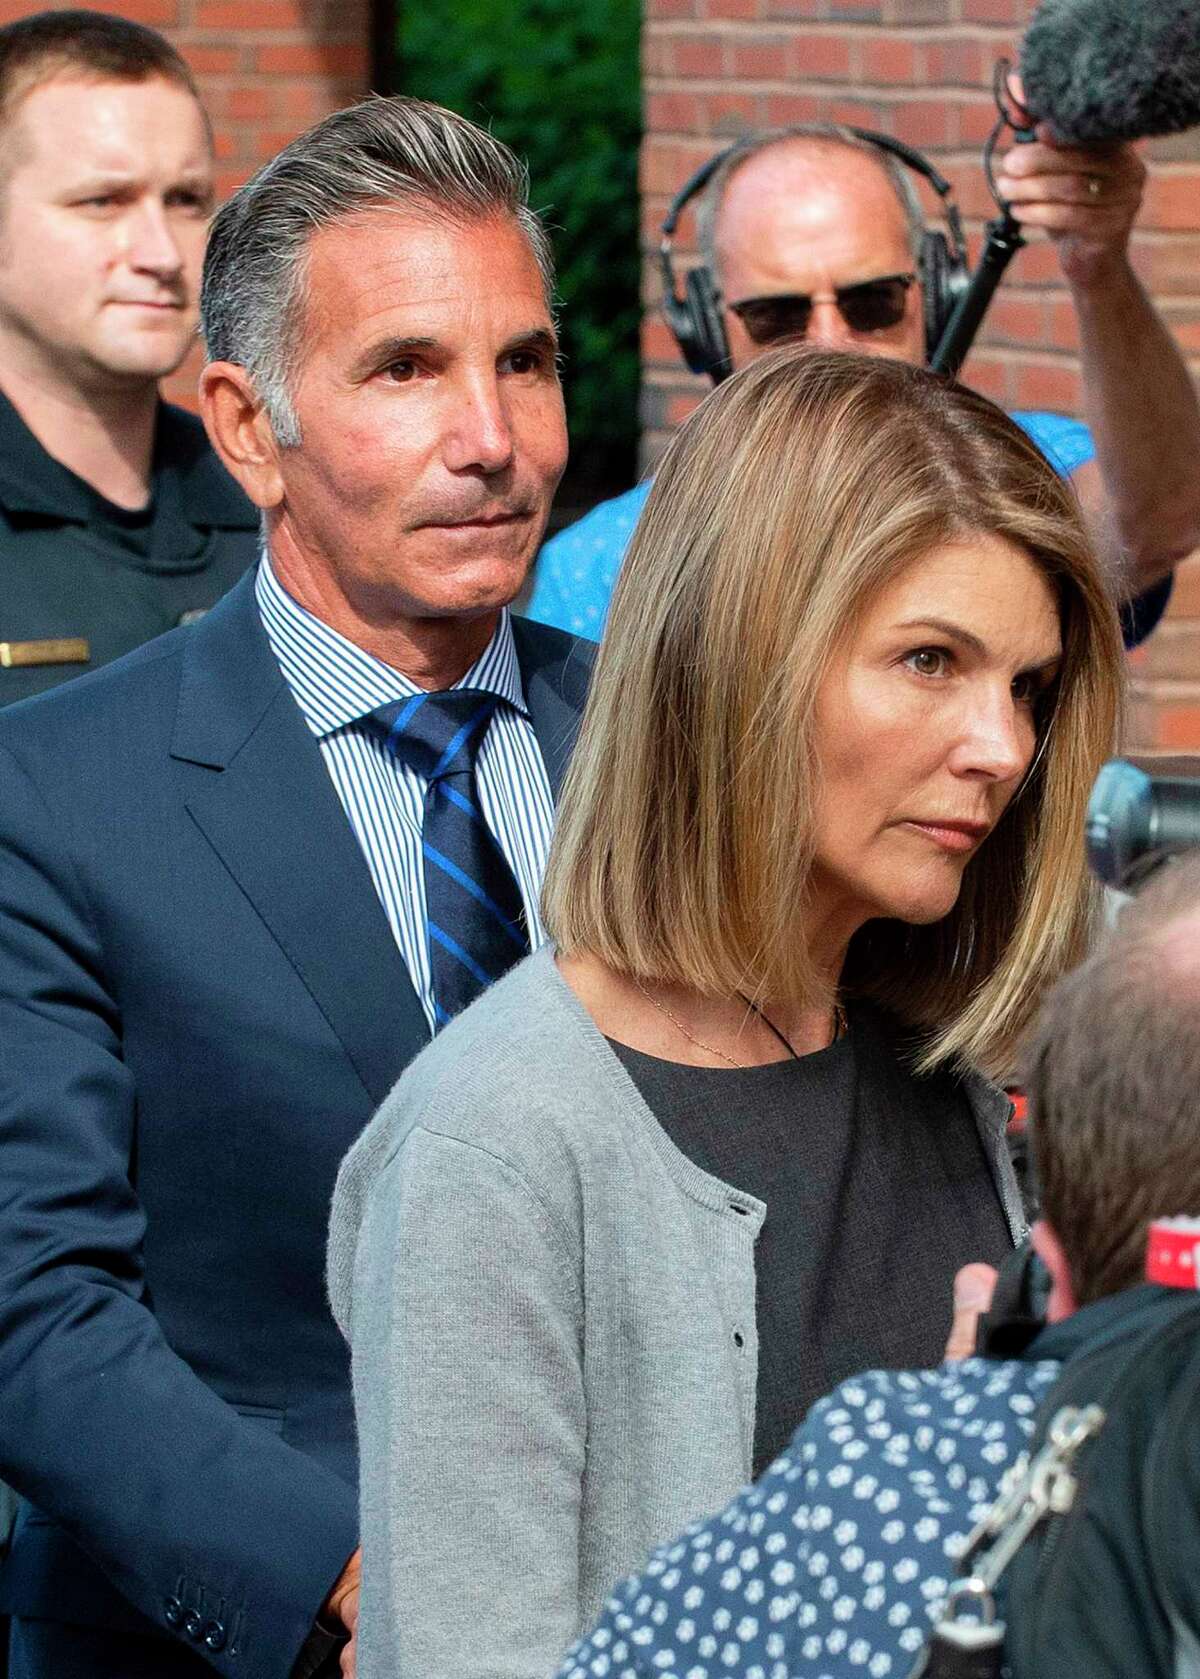 Actress Lori Loughlin, right, and husband Mossimo Giannulli exit the Boston Federal Court house after a pre-trial hearing with Magistrate Judge Kelley at the John Joseph Moakley U.S. Courthouse in Boston on Aug. 27, 2019. Loughlin and Giannulli are charged with conspiracy to commit mail and wire fraud and conspiracy to commit money laundering in the college admissions scandal.